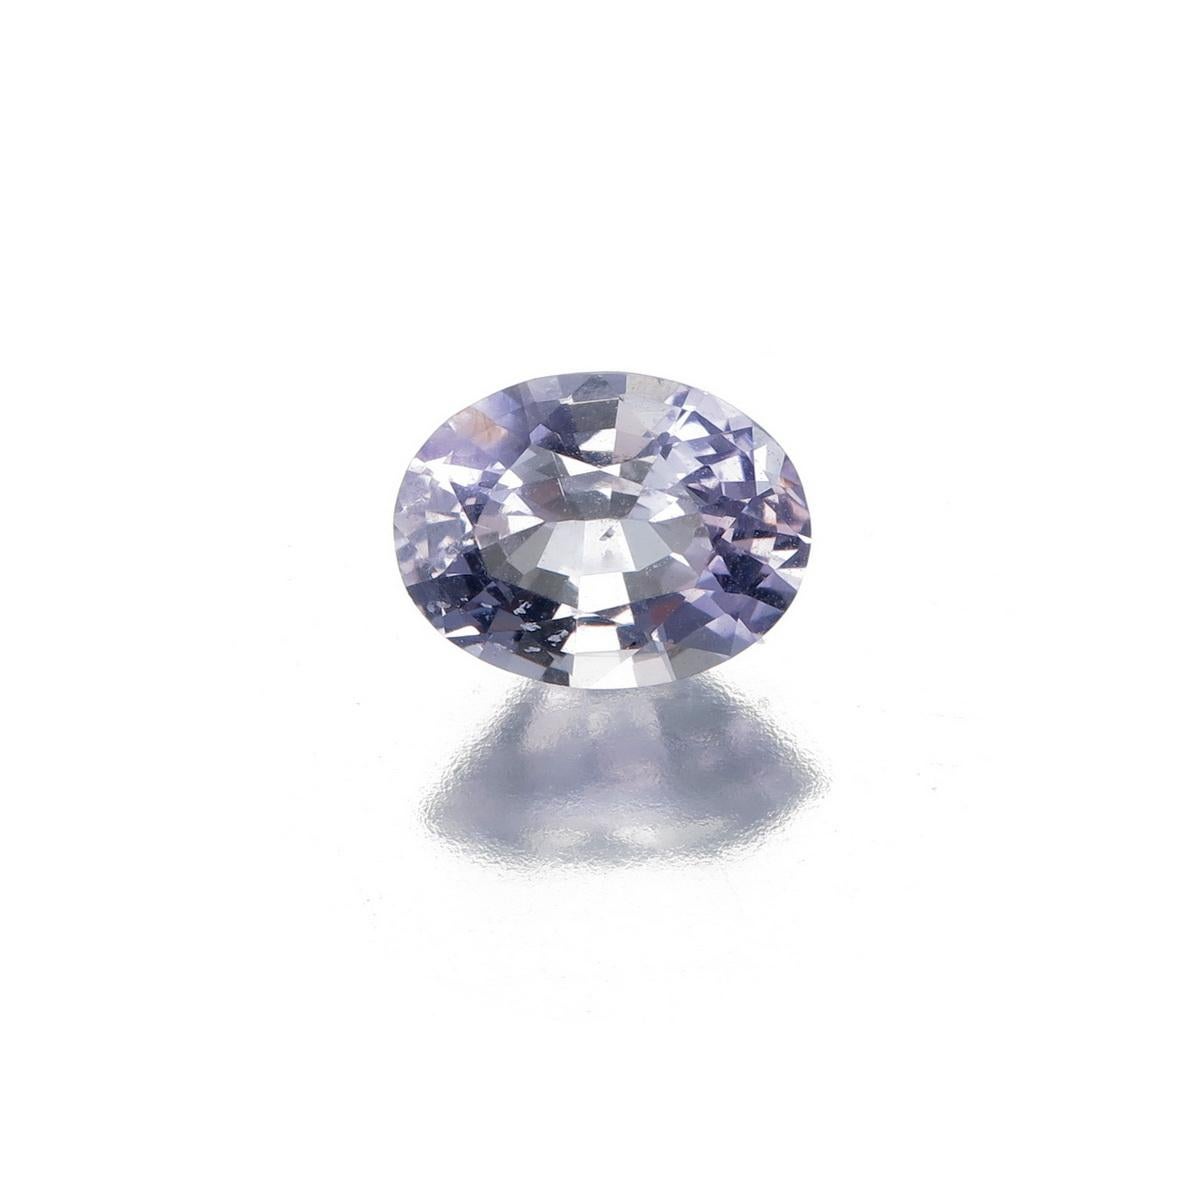 Lovely Sparkling  1.67 Carat Natural Purple Spinel from Burma
Dimension: 8.41 x 6.43x 4.45. mm
Shape: Oval Faceted Cut
Weight: 1.67 Carat
No Heat
GIL Certified Report No: STO2022102151326
 
